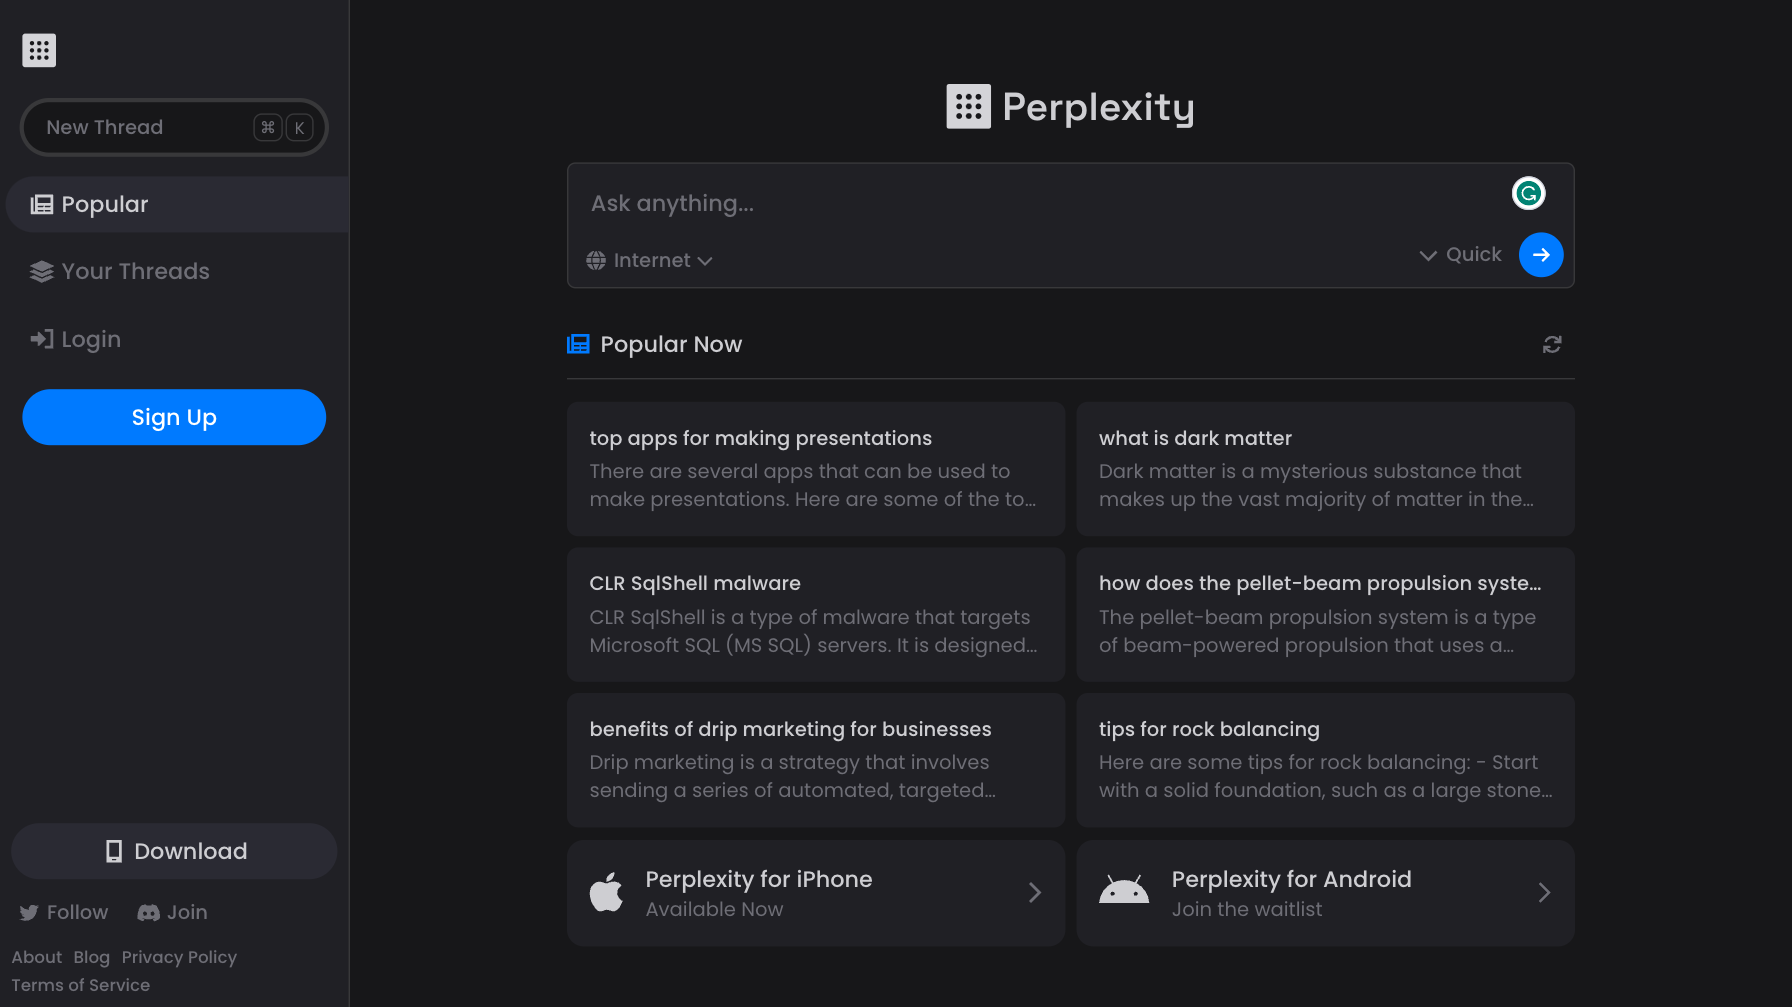 Perplexity AI - An iPhone App that Gives You Instant Answer - Appndo